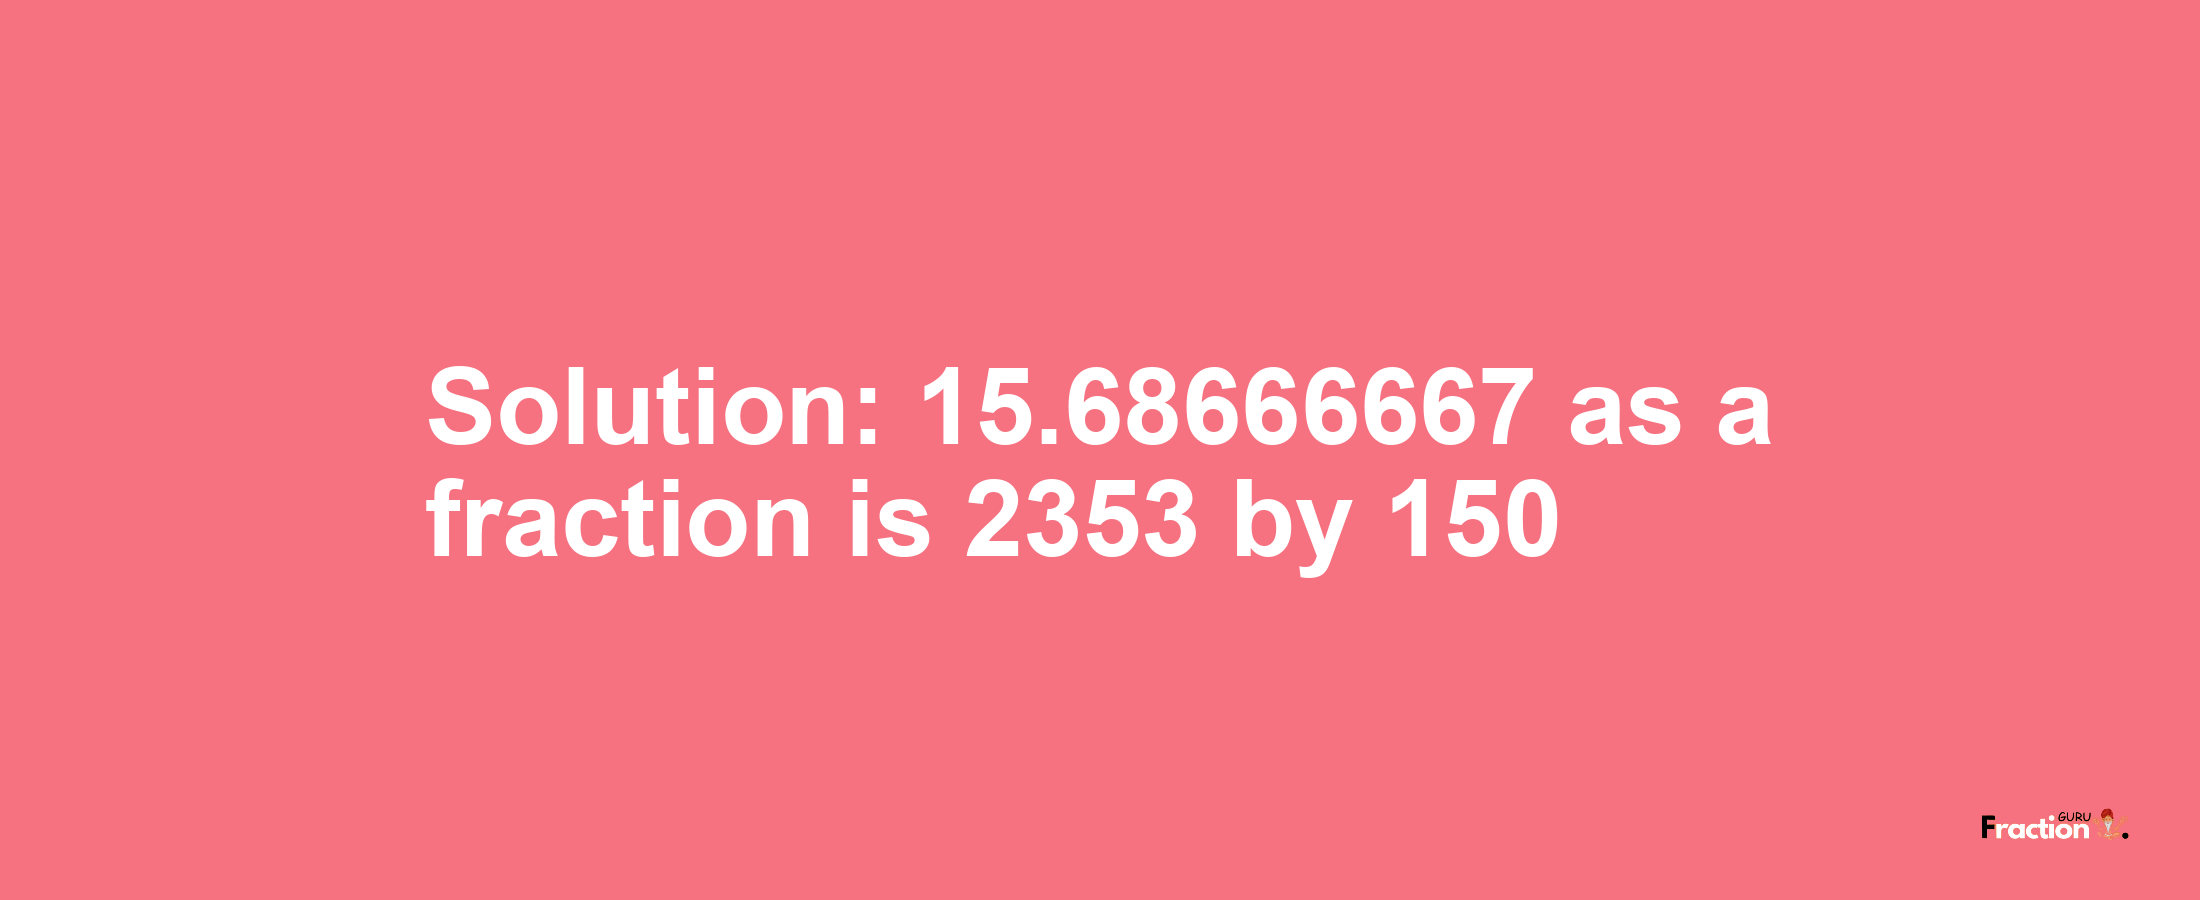 Solution:15.68666667 as a fraction is 2353/150